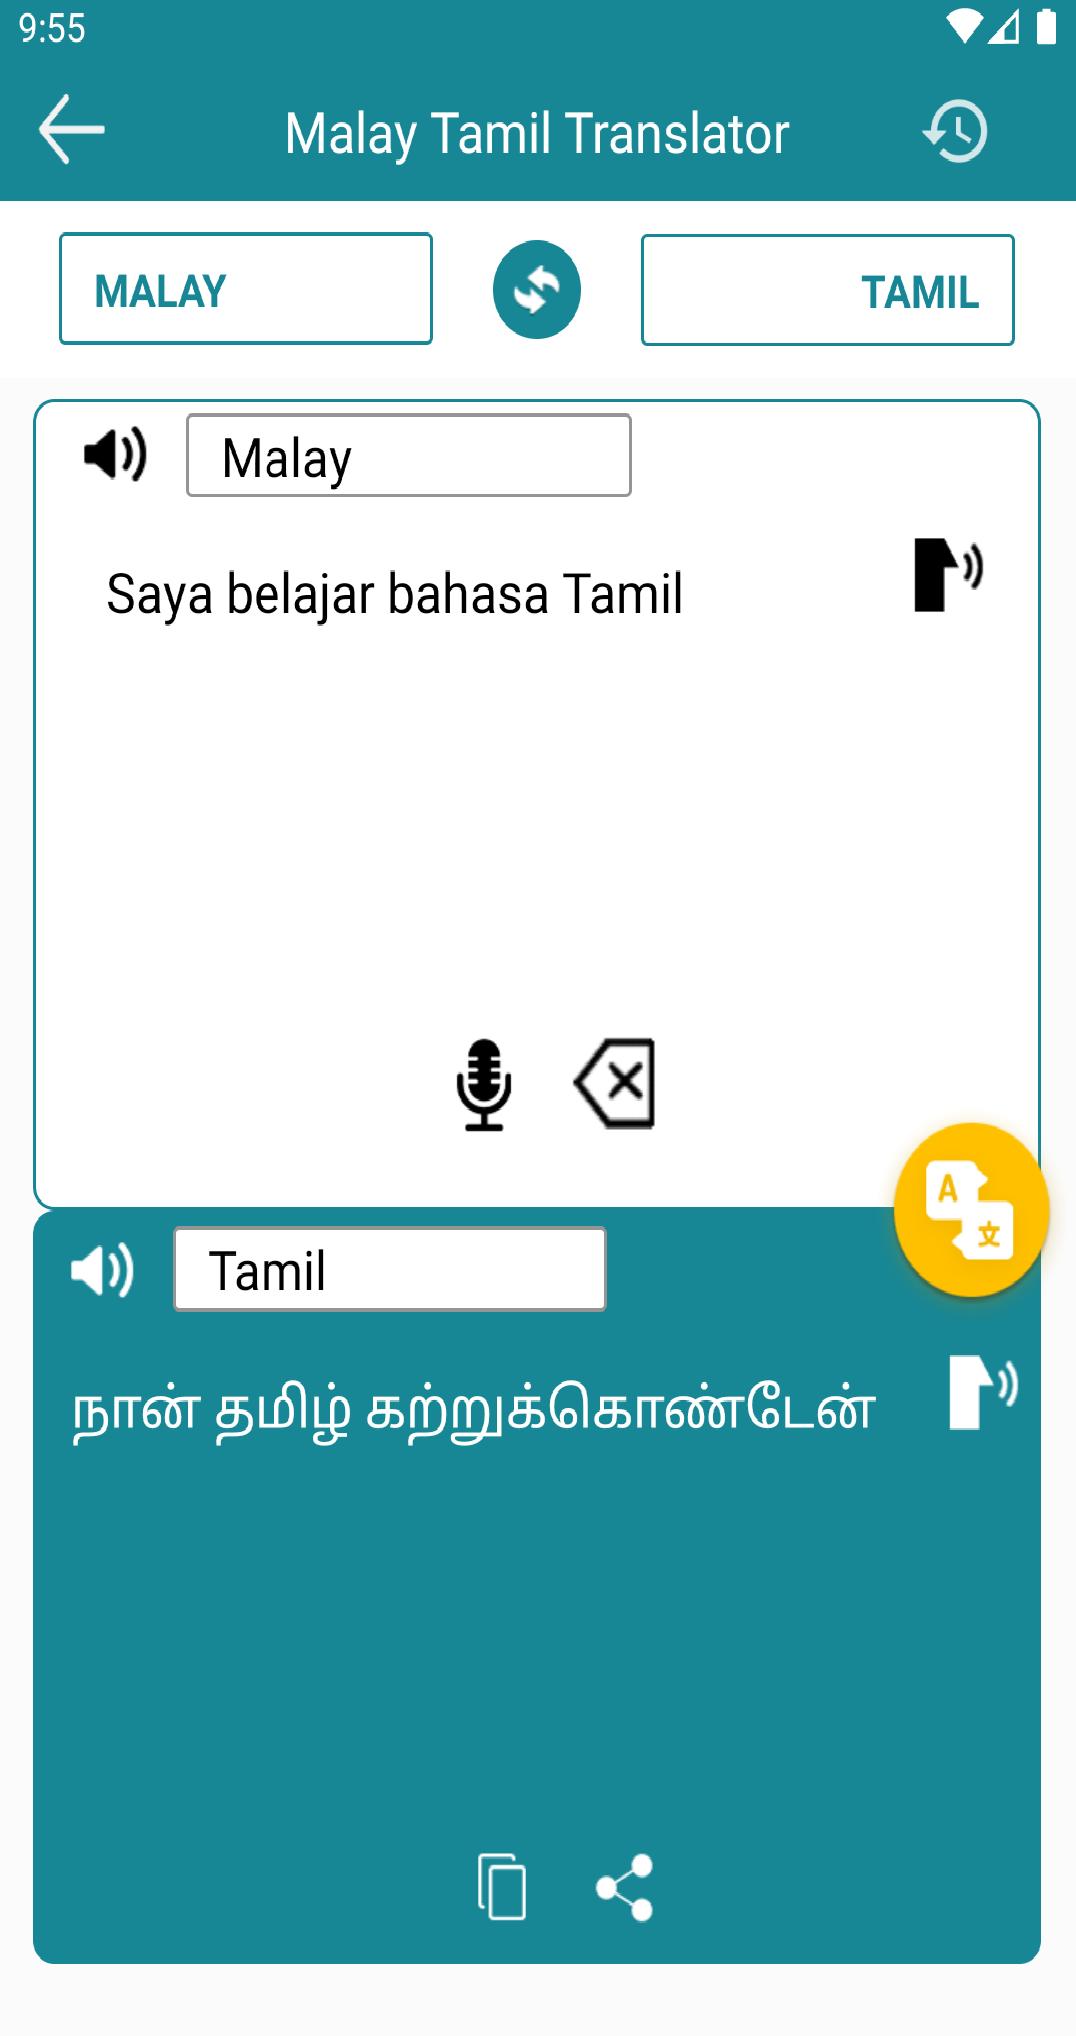 Malay Tamil Translation for Android - APK Download